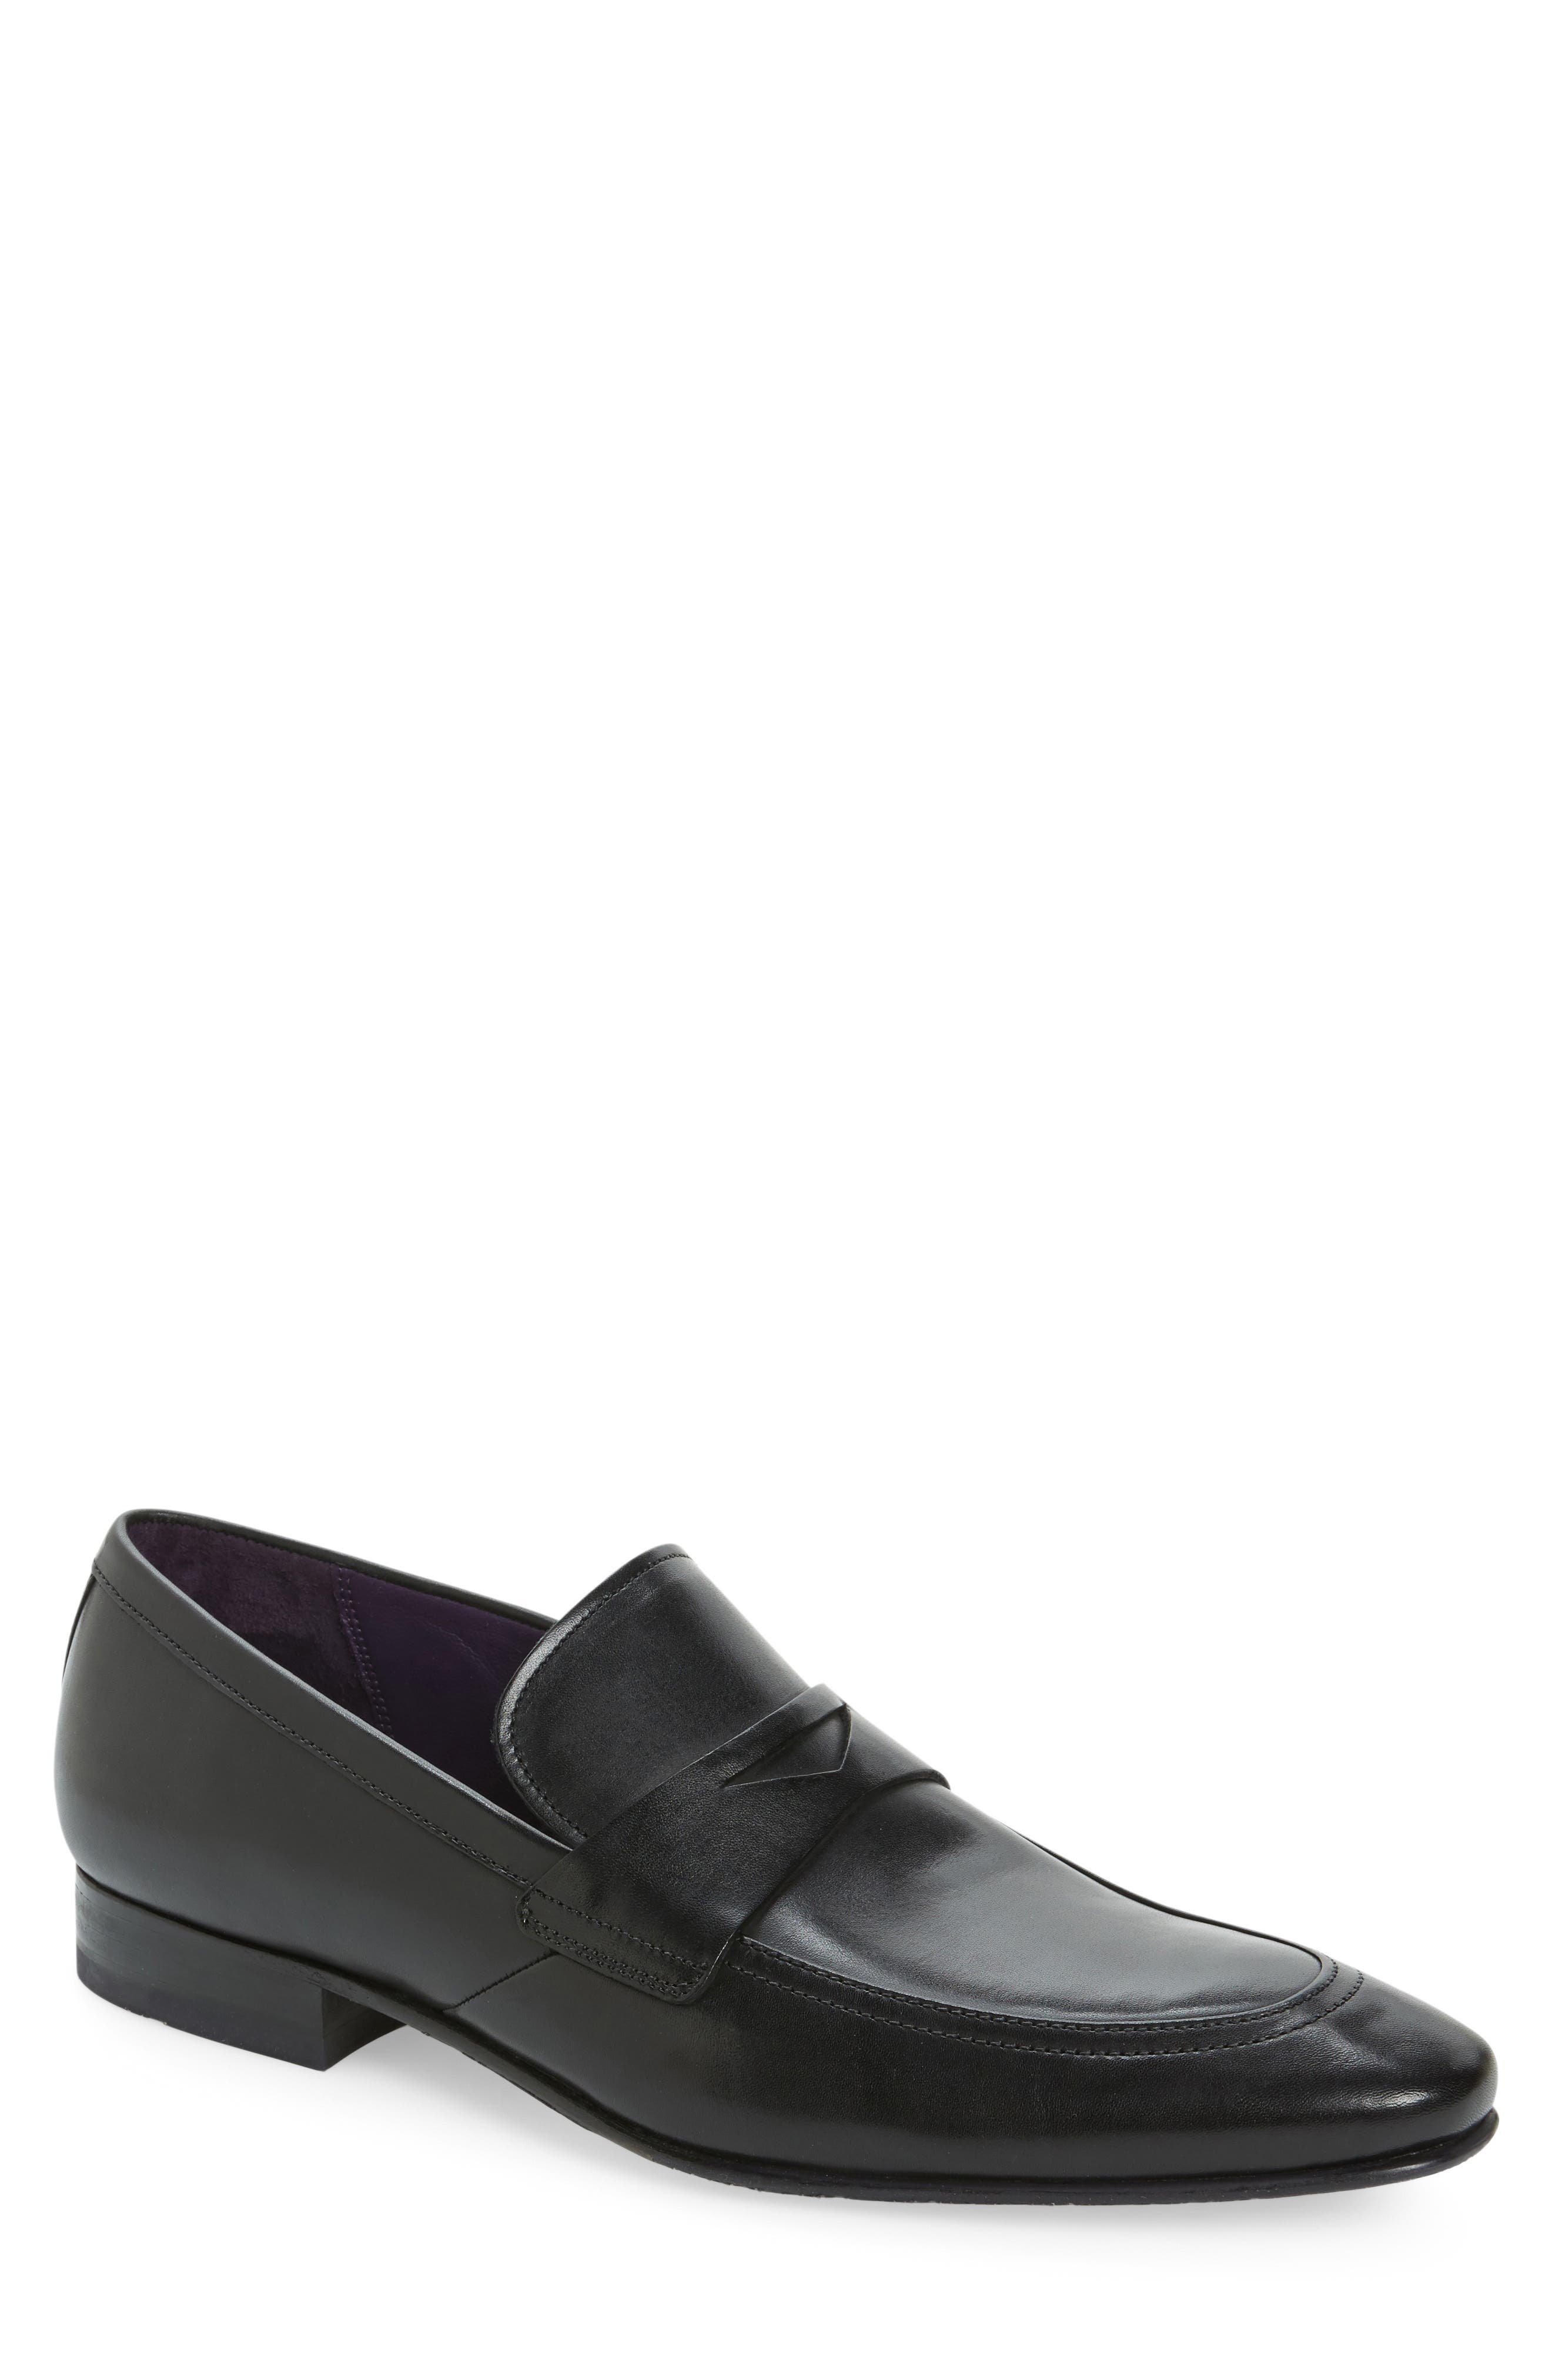 Ted Baker London Roykso Penny Loafer 